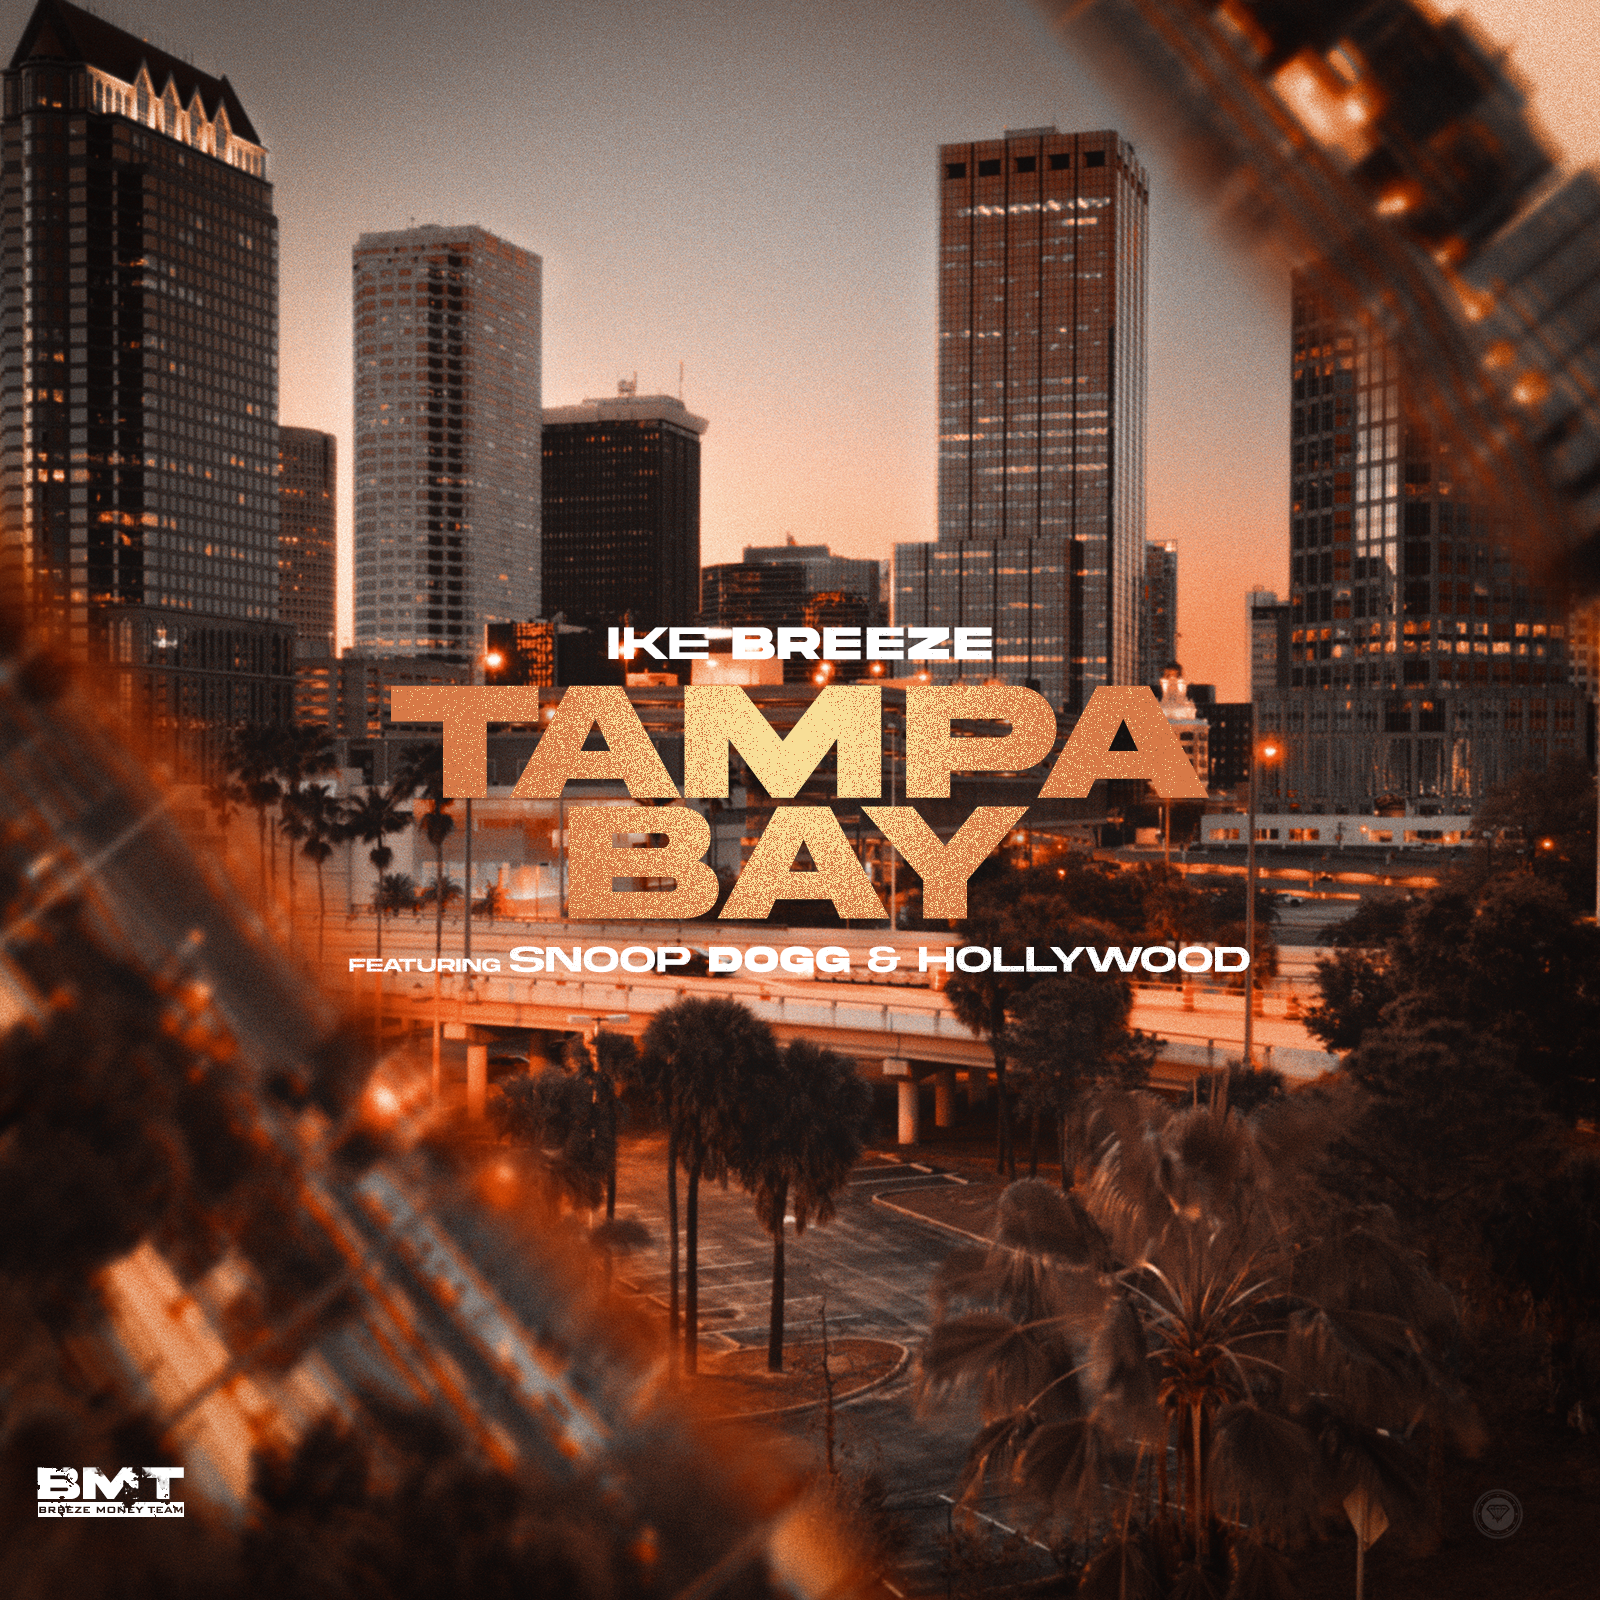 Ike Breeze Goes to "Tampa Bay" with Snoop Dogg